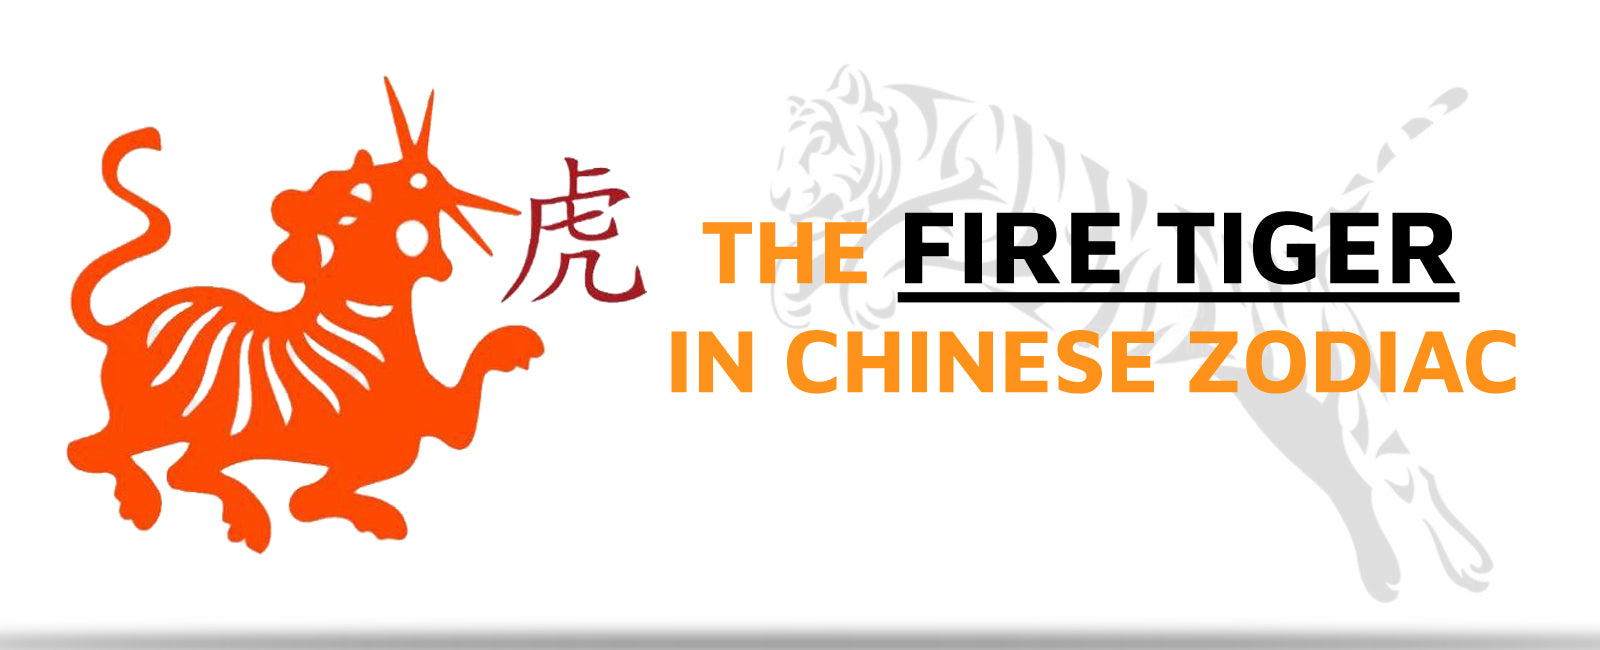 The Fire Tiger in Chinese zodiac